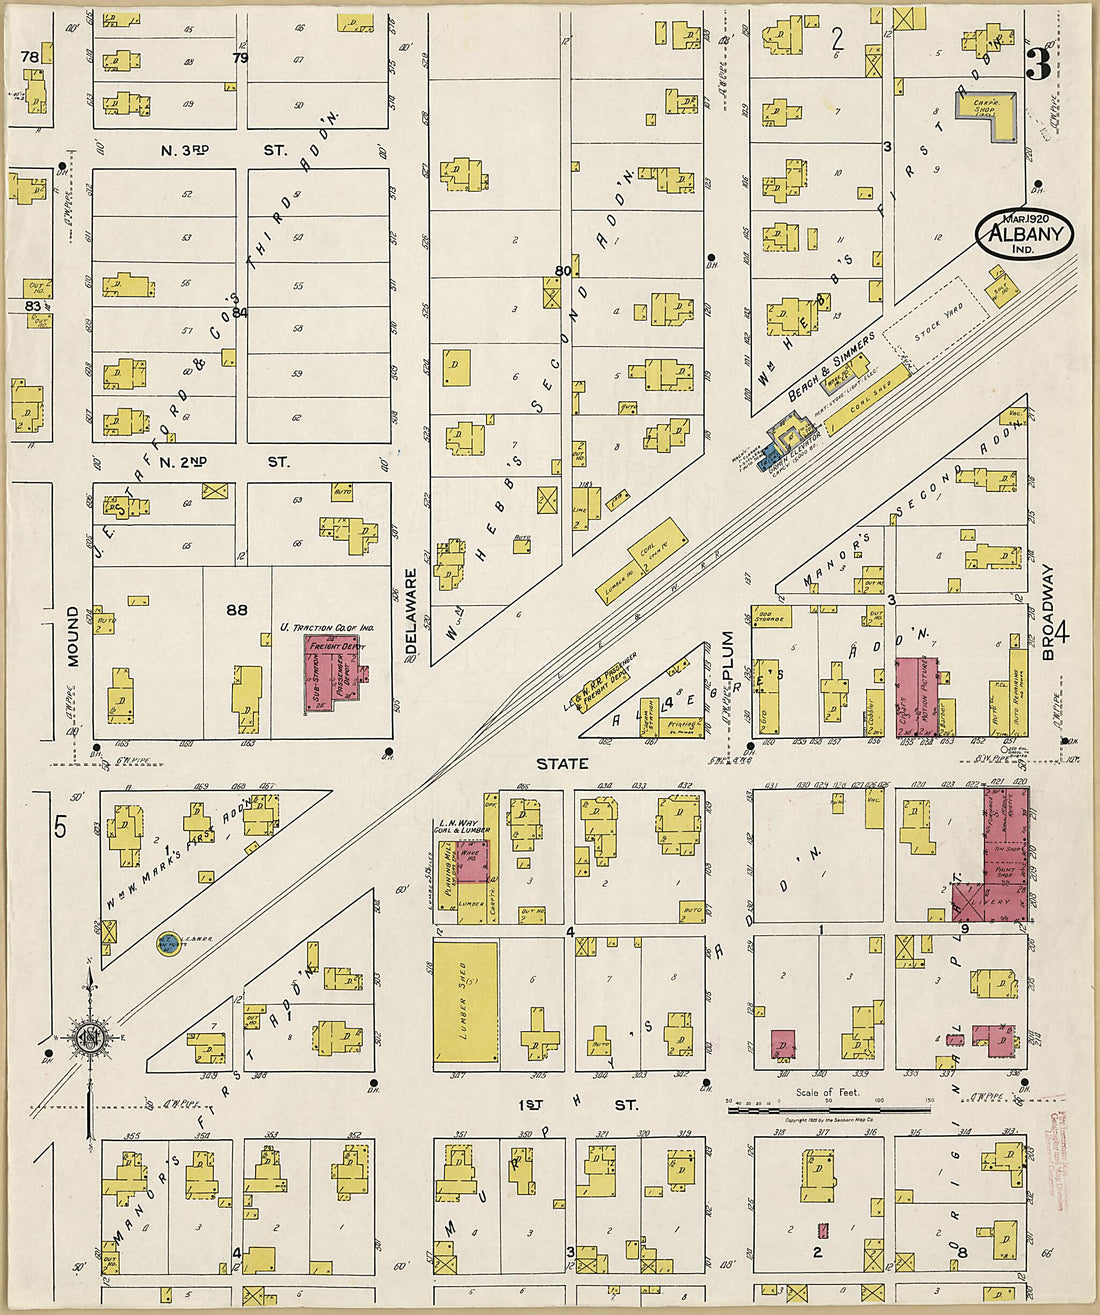 This old map of Albany, Delaware County, Indiana was created by Sanborn Map Company in 1920